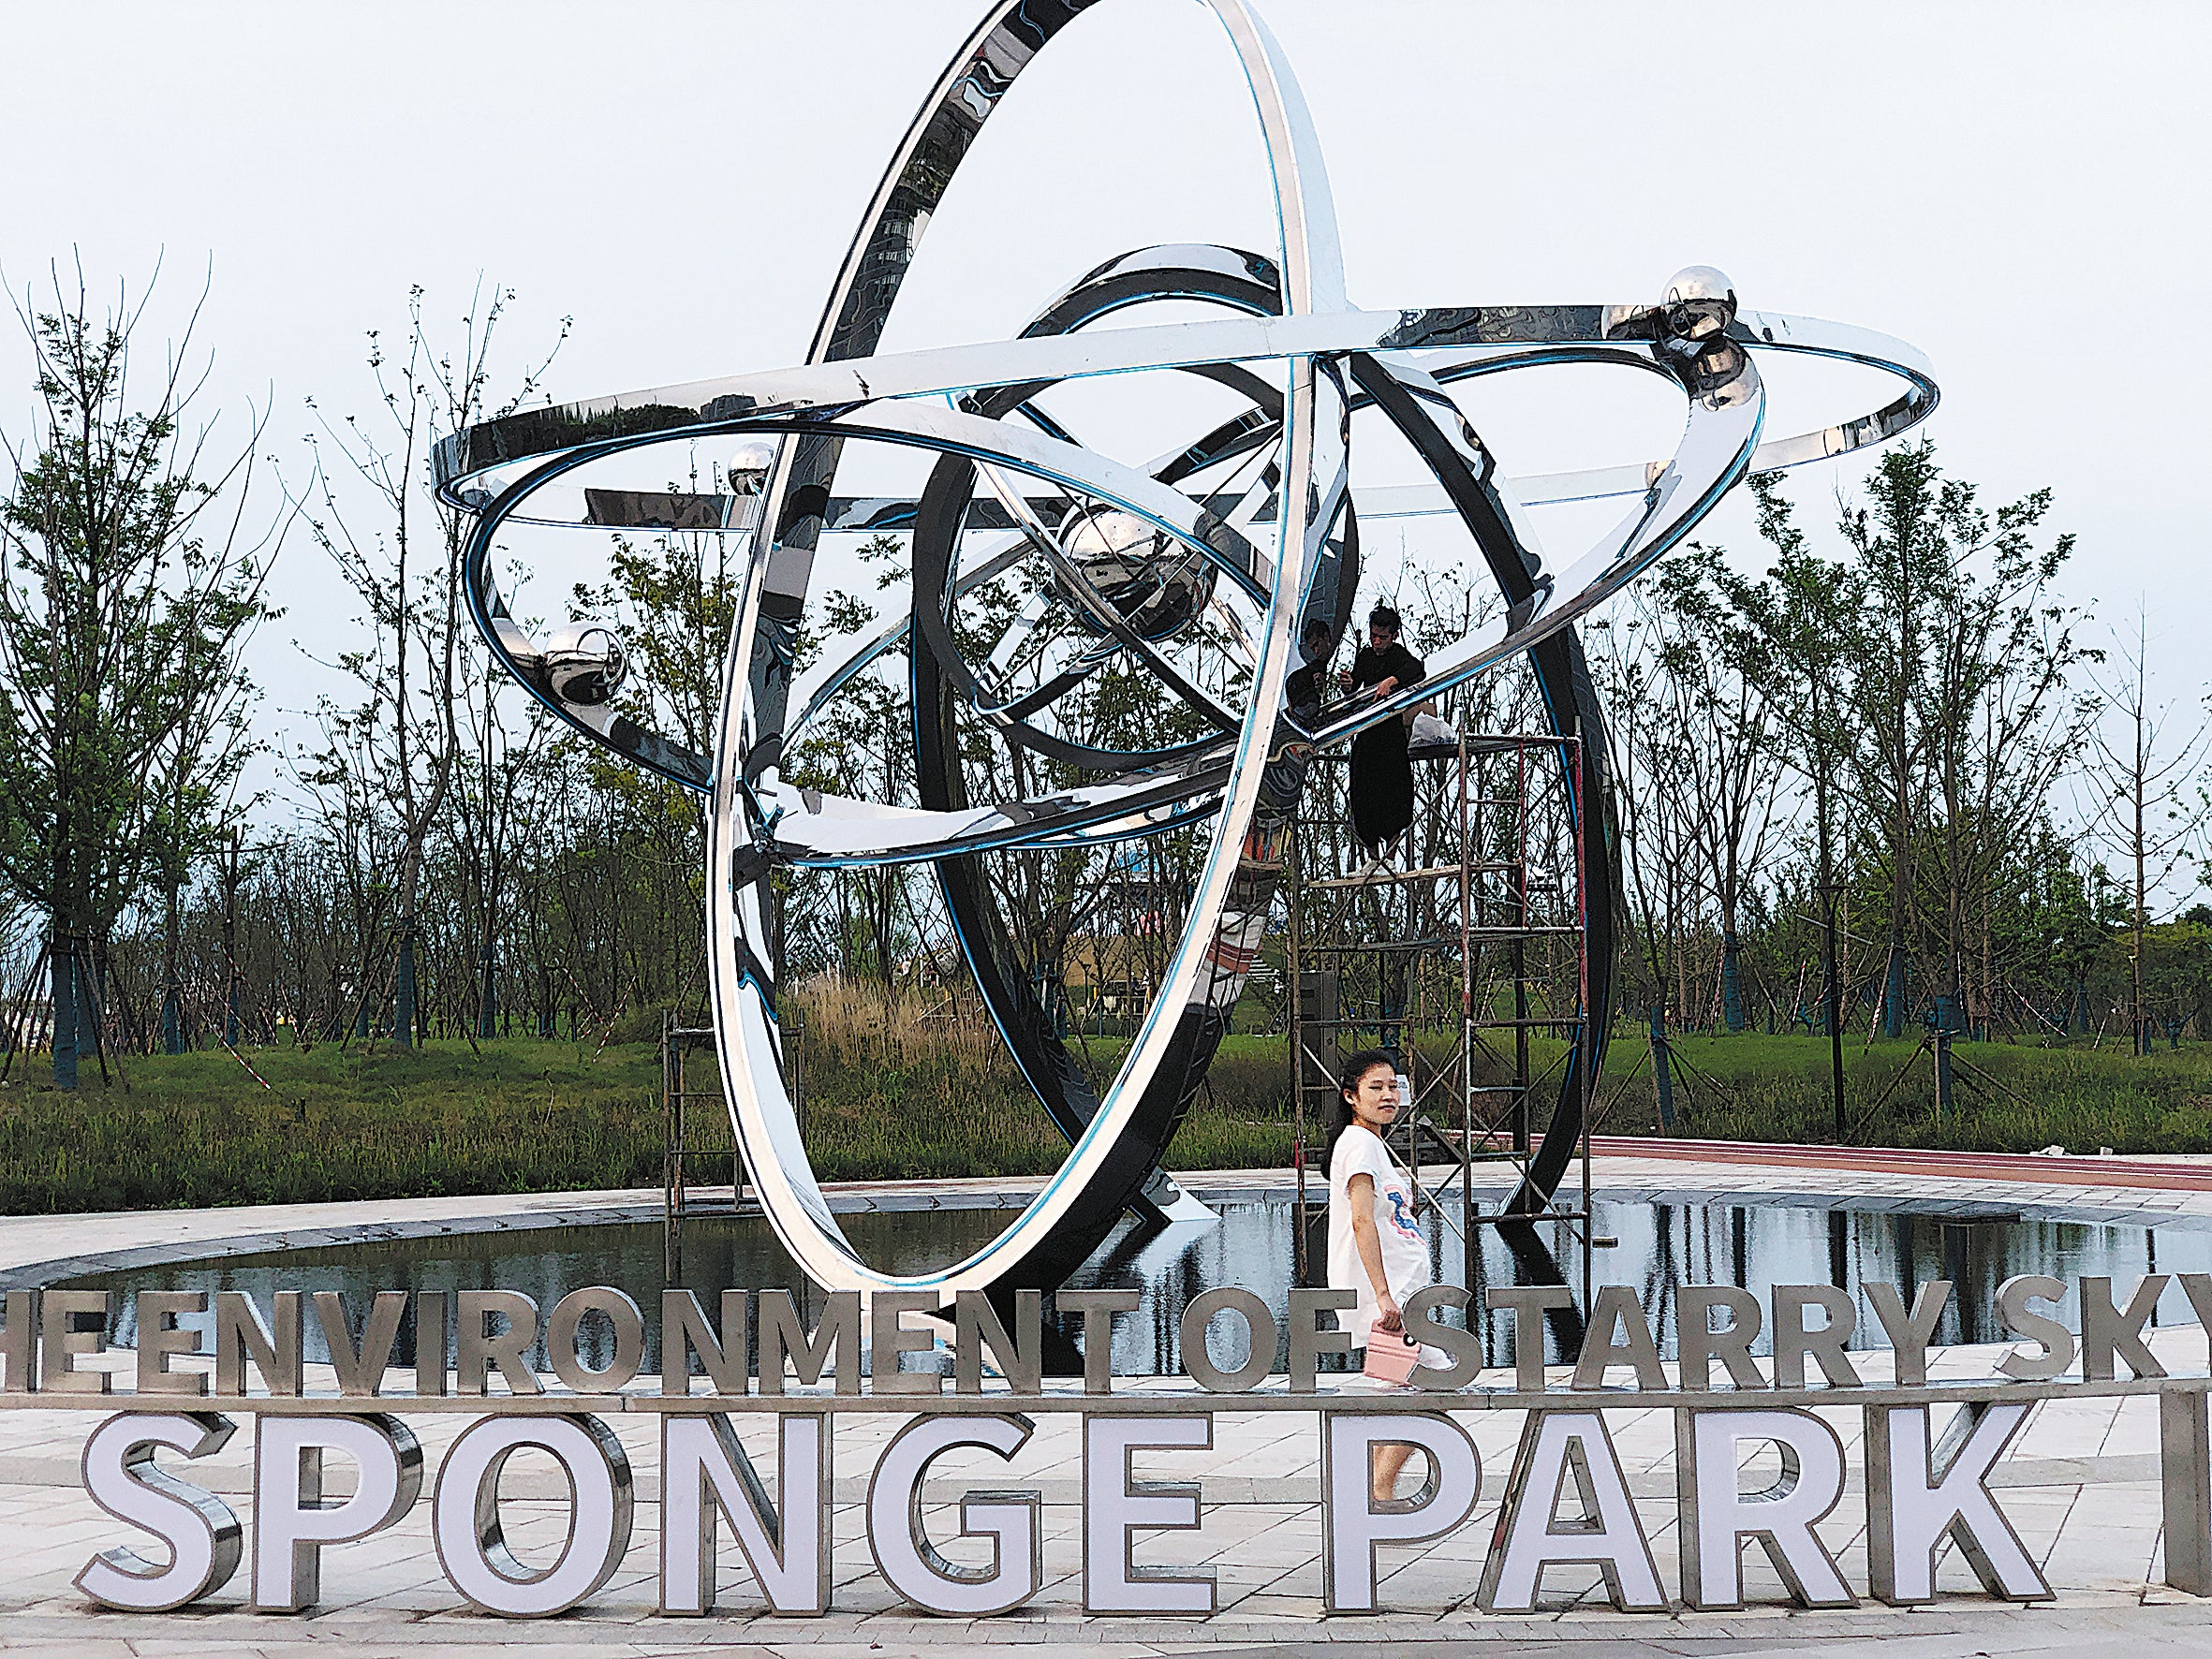 The park entrance with its planetary sculpture